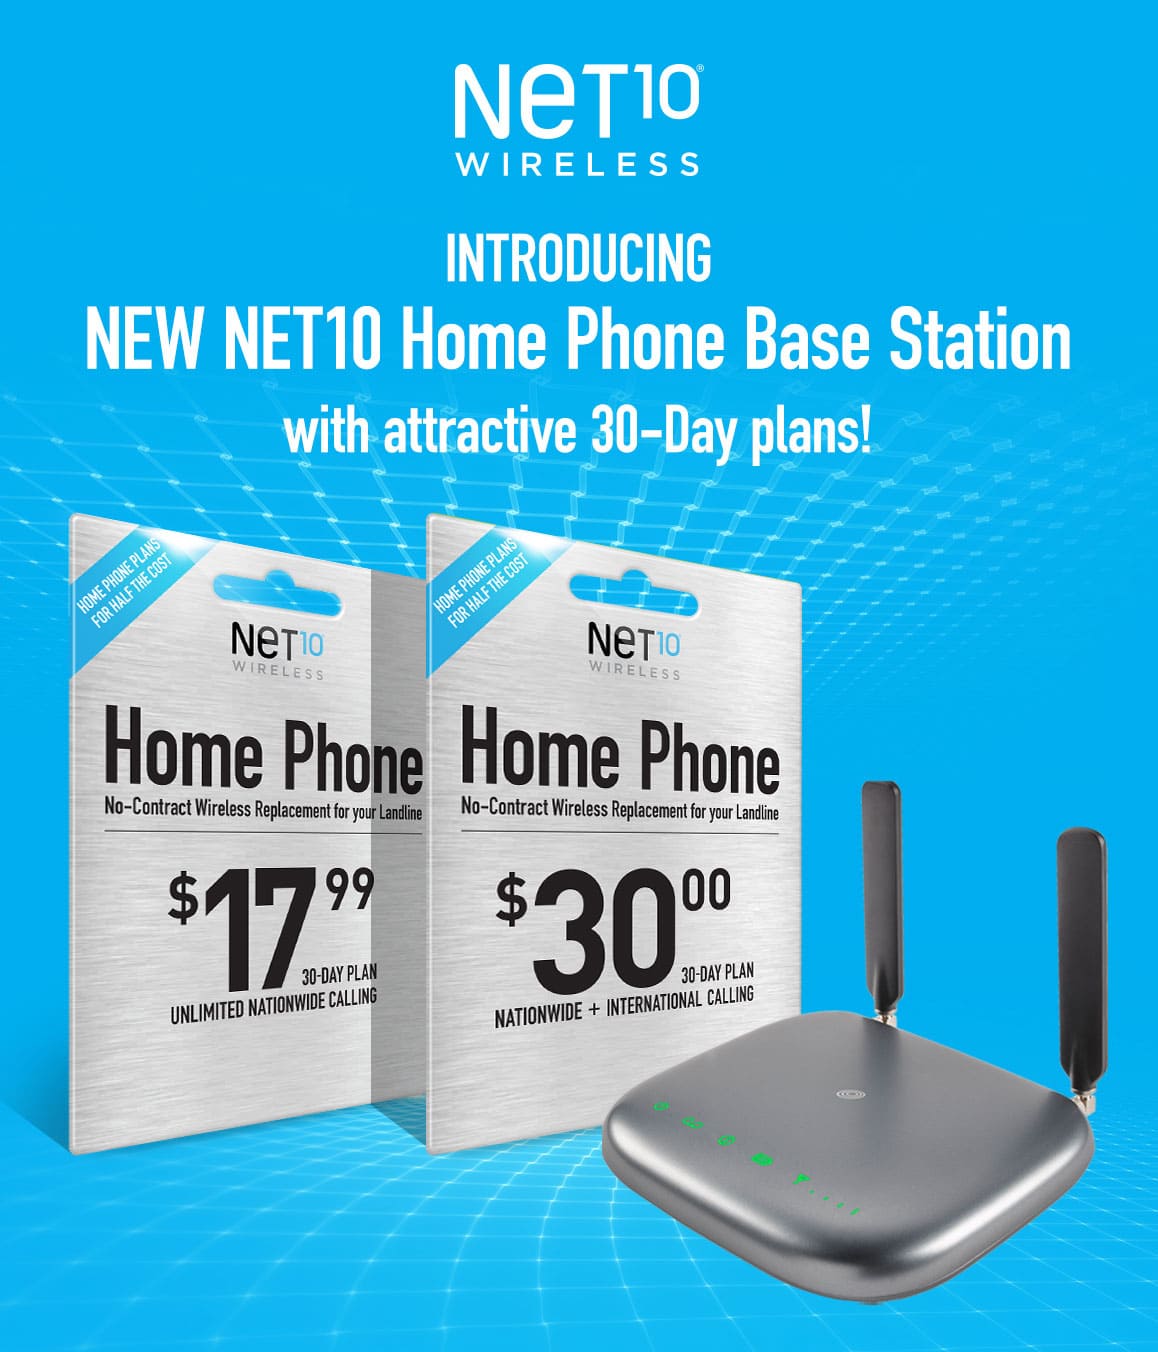 INTRODUCING NEW NET10 Home Phone Base Station with attractive 30-Day plans!